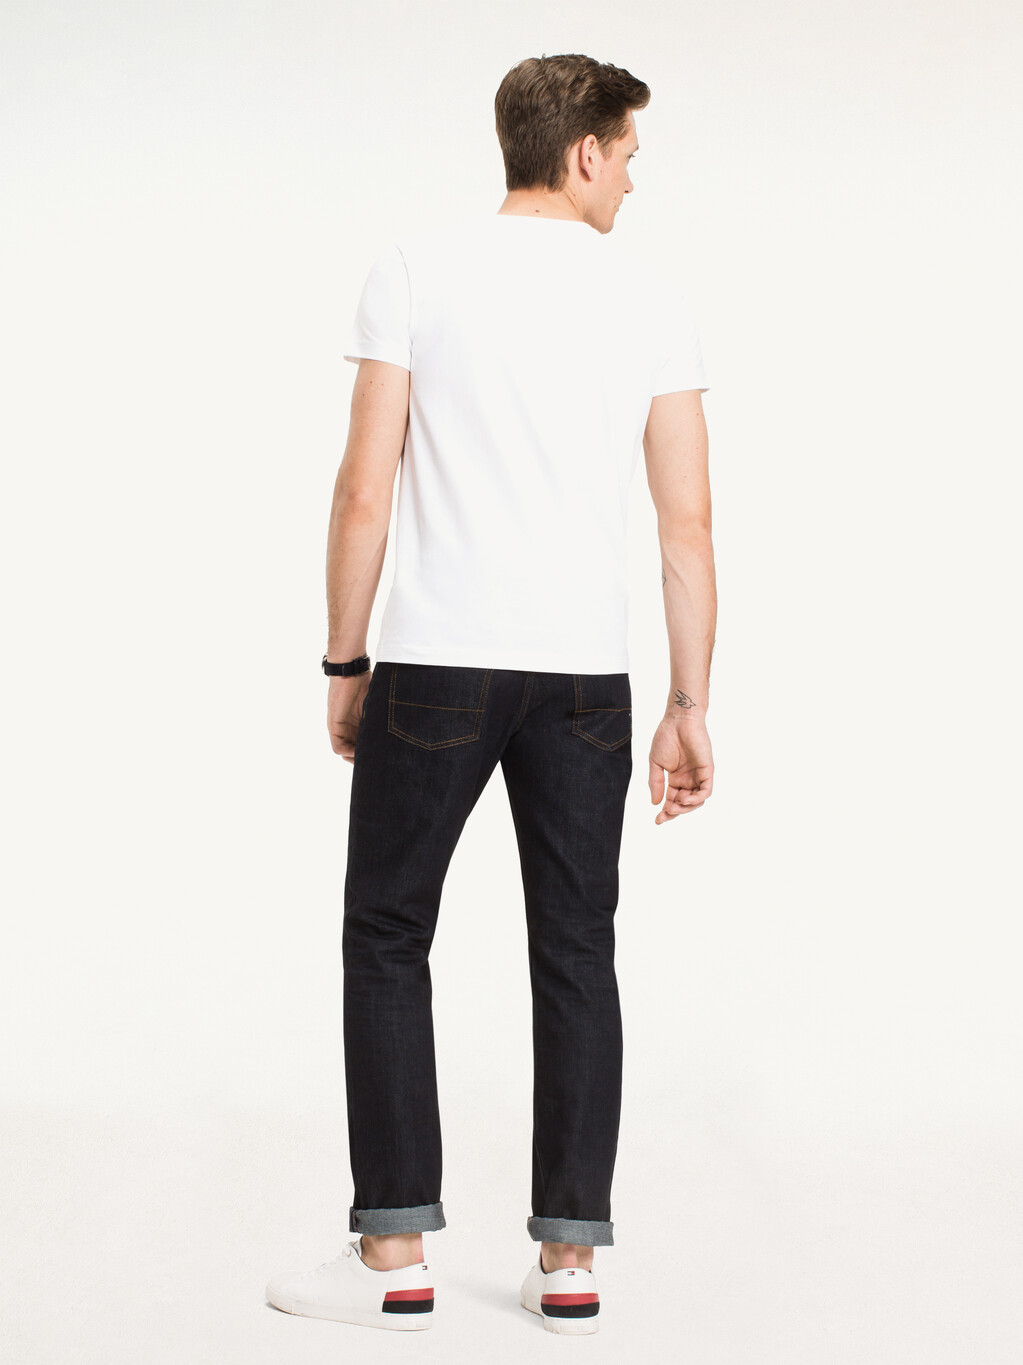 Buy SLIM FIT STRETCH TEE in color WHITE